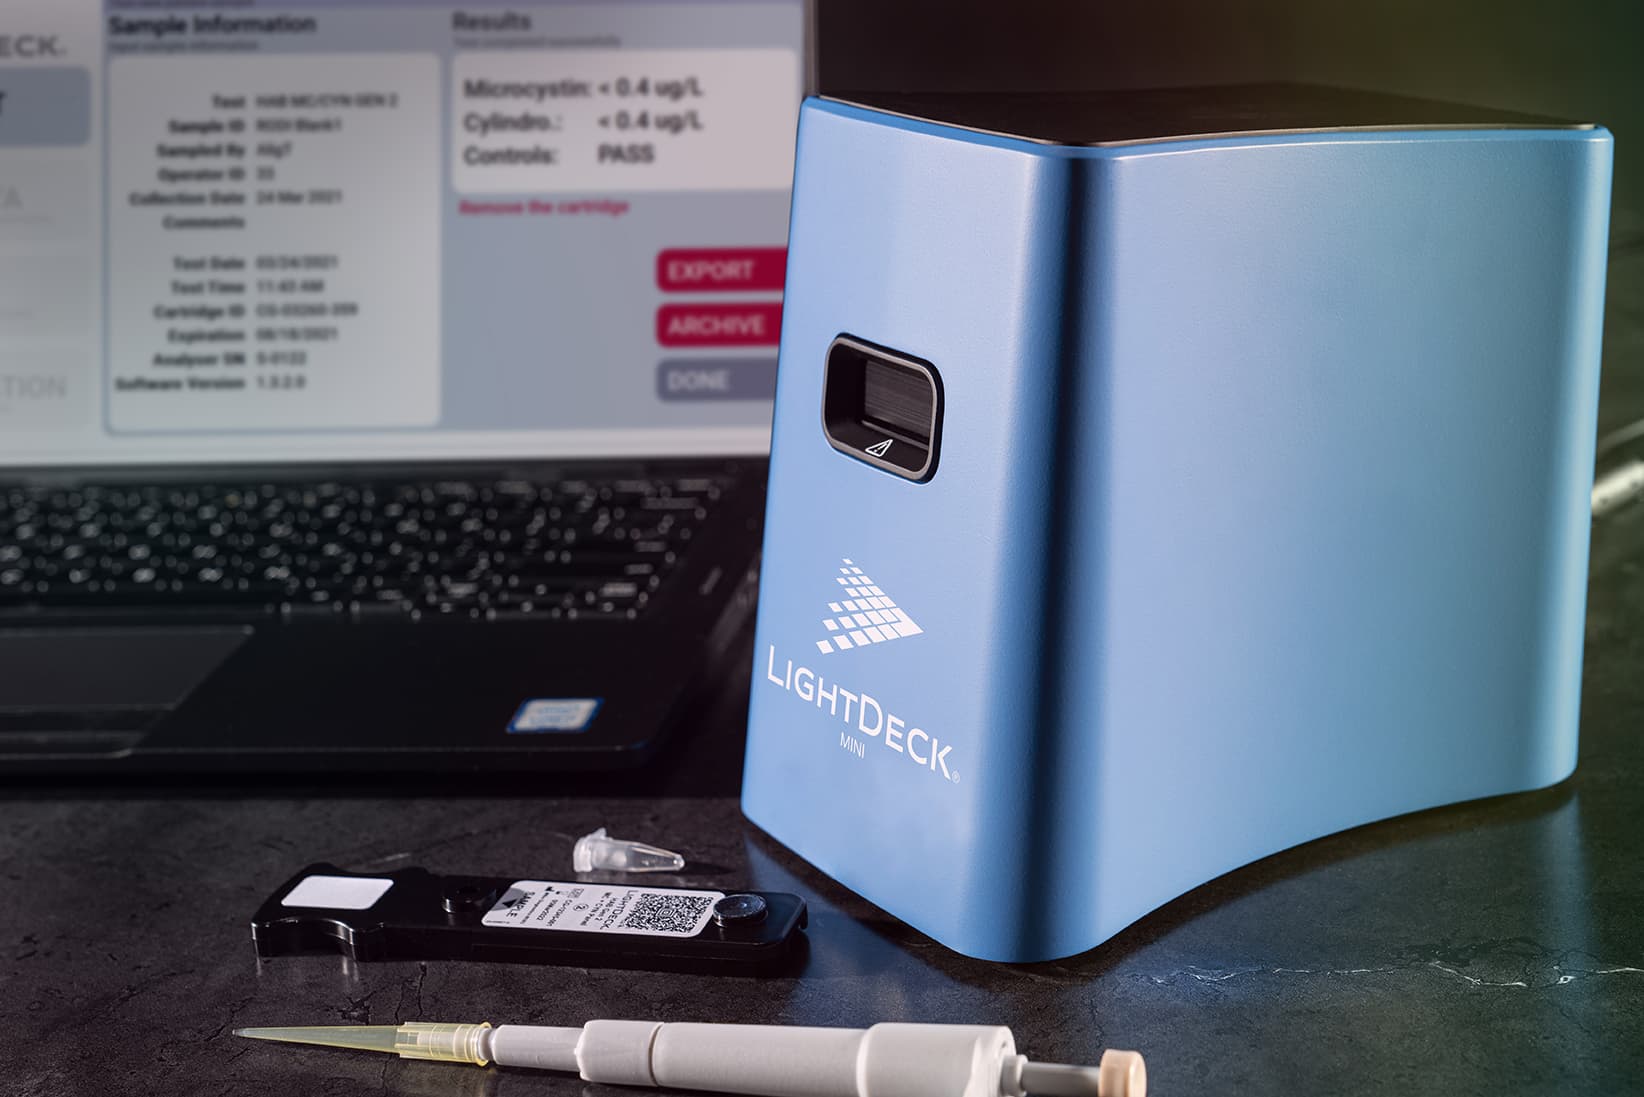 LightDeck Diagnostics Partners with Hach to Deploy 10-Minute Water Quality Tests Nationwide - LightDeck DiagnosticsThe deal will commercialize L...